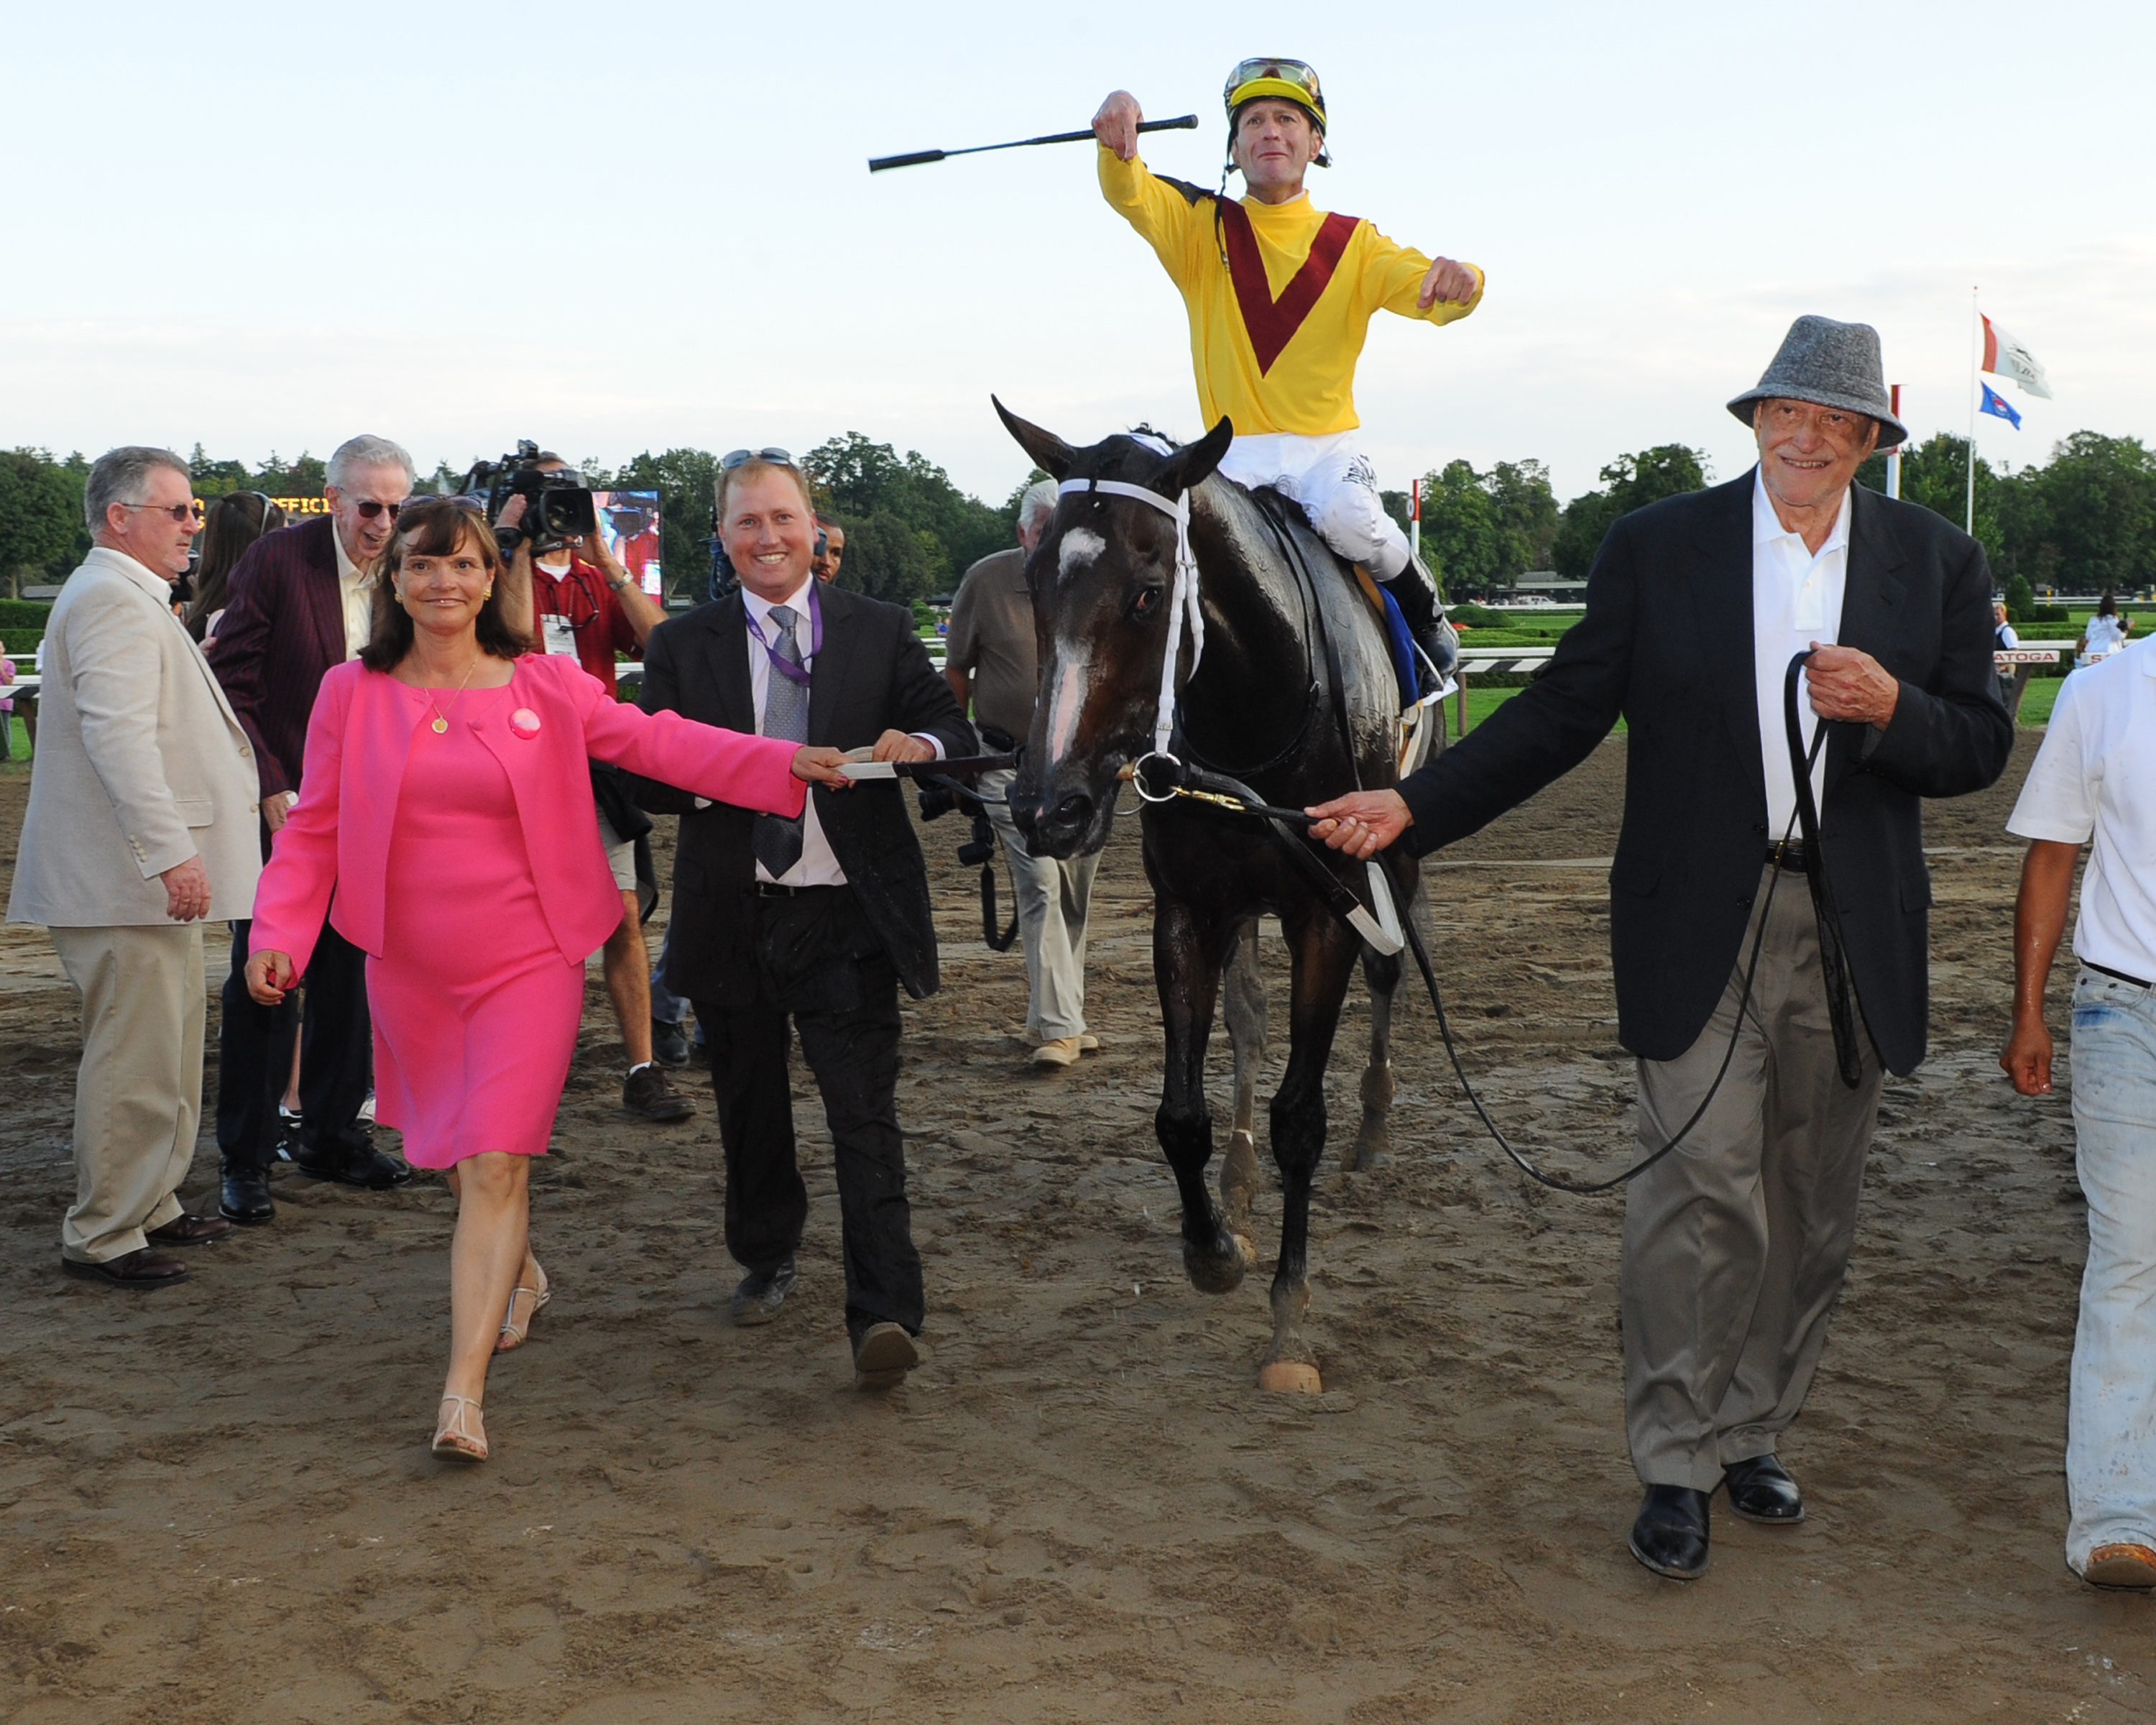 Rachel Alexandra, Calvin Borel up, is led to the winner's circle after winning the 2009 Woodward at Saratoga Race Course (NYRA)